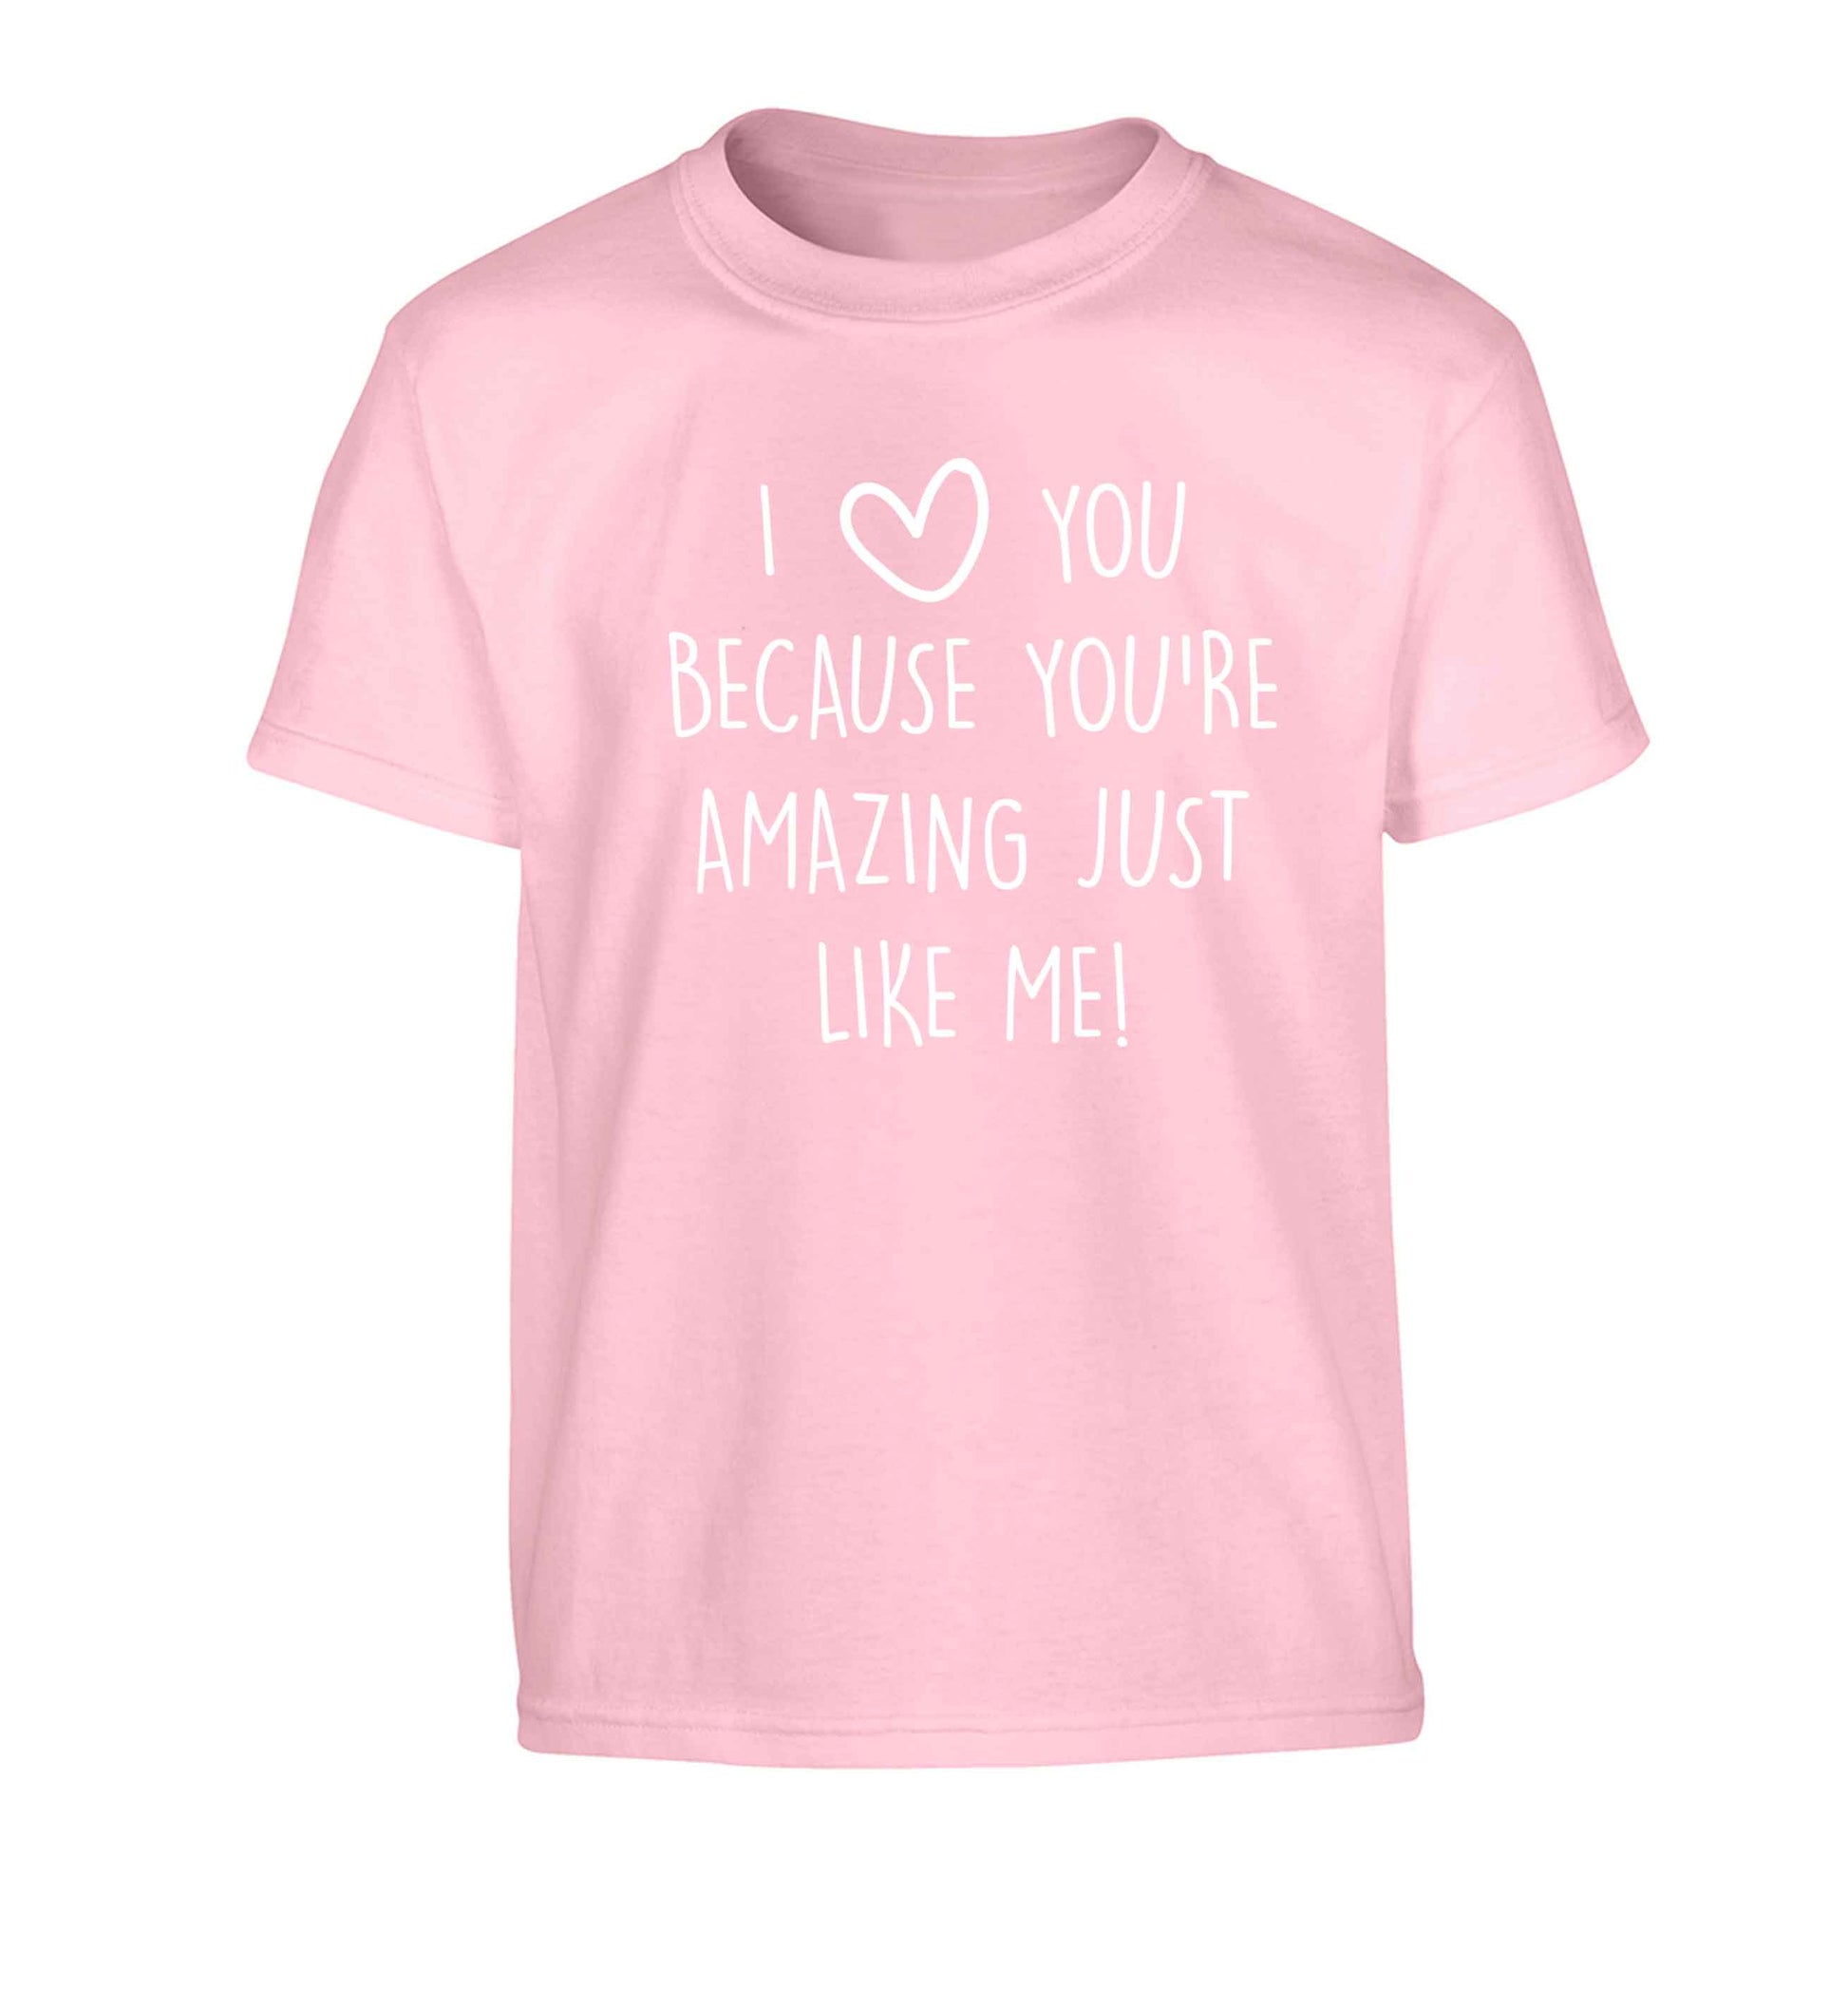 I love you because you're amazing just like me Children's light pink Tshirt 12-13 Years